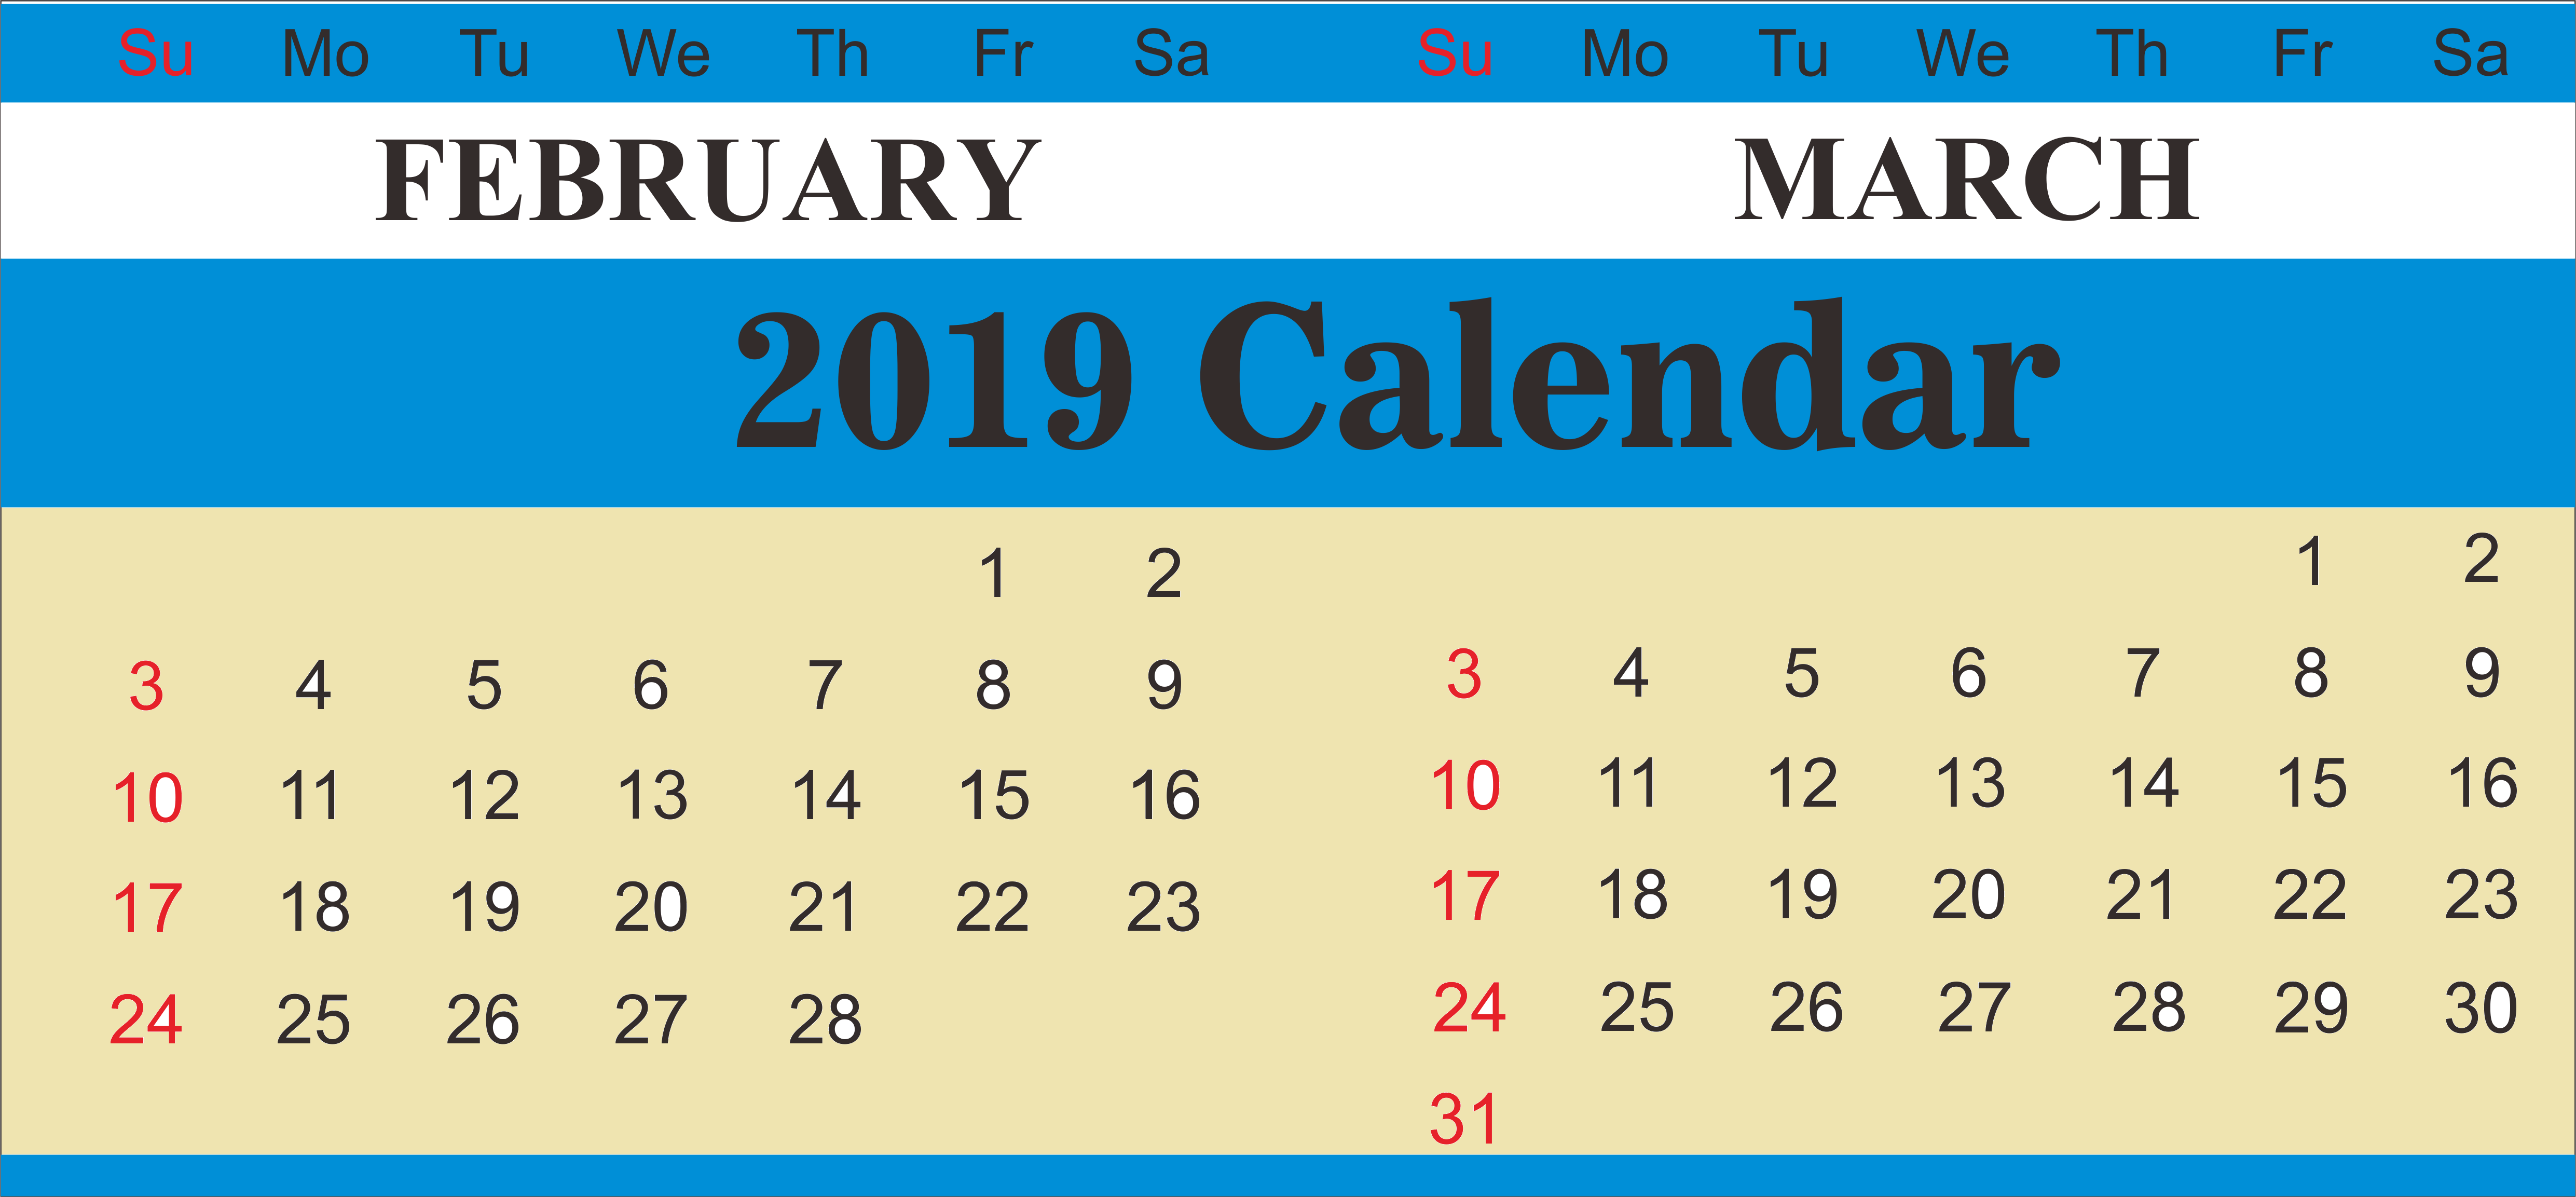 calendar-february-march-2019-printable-template-free-download